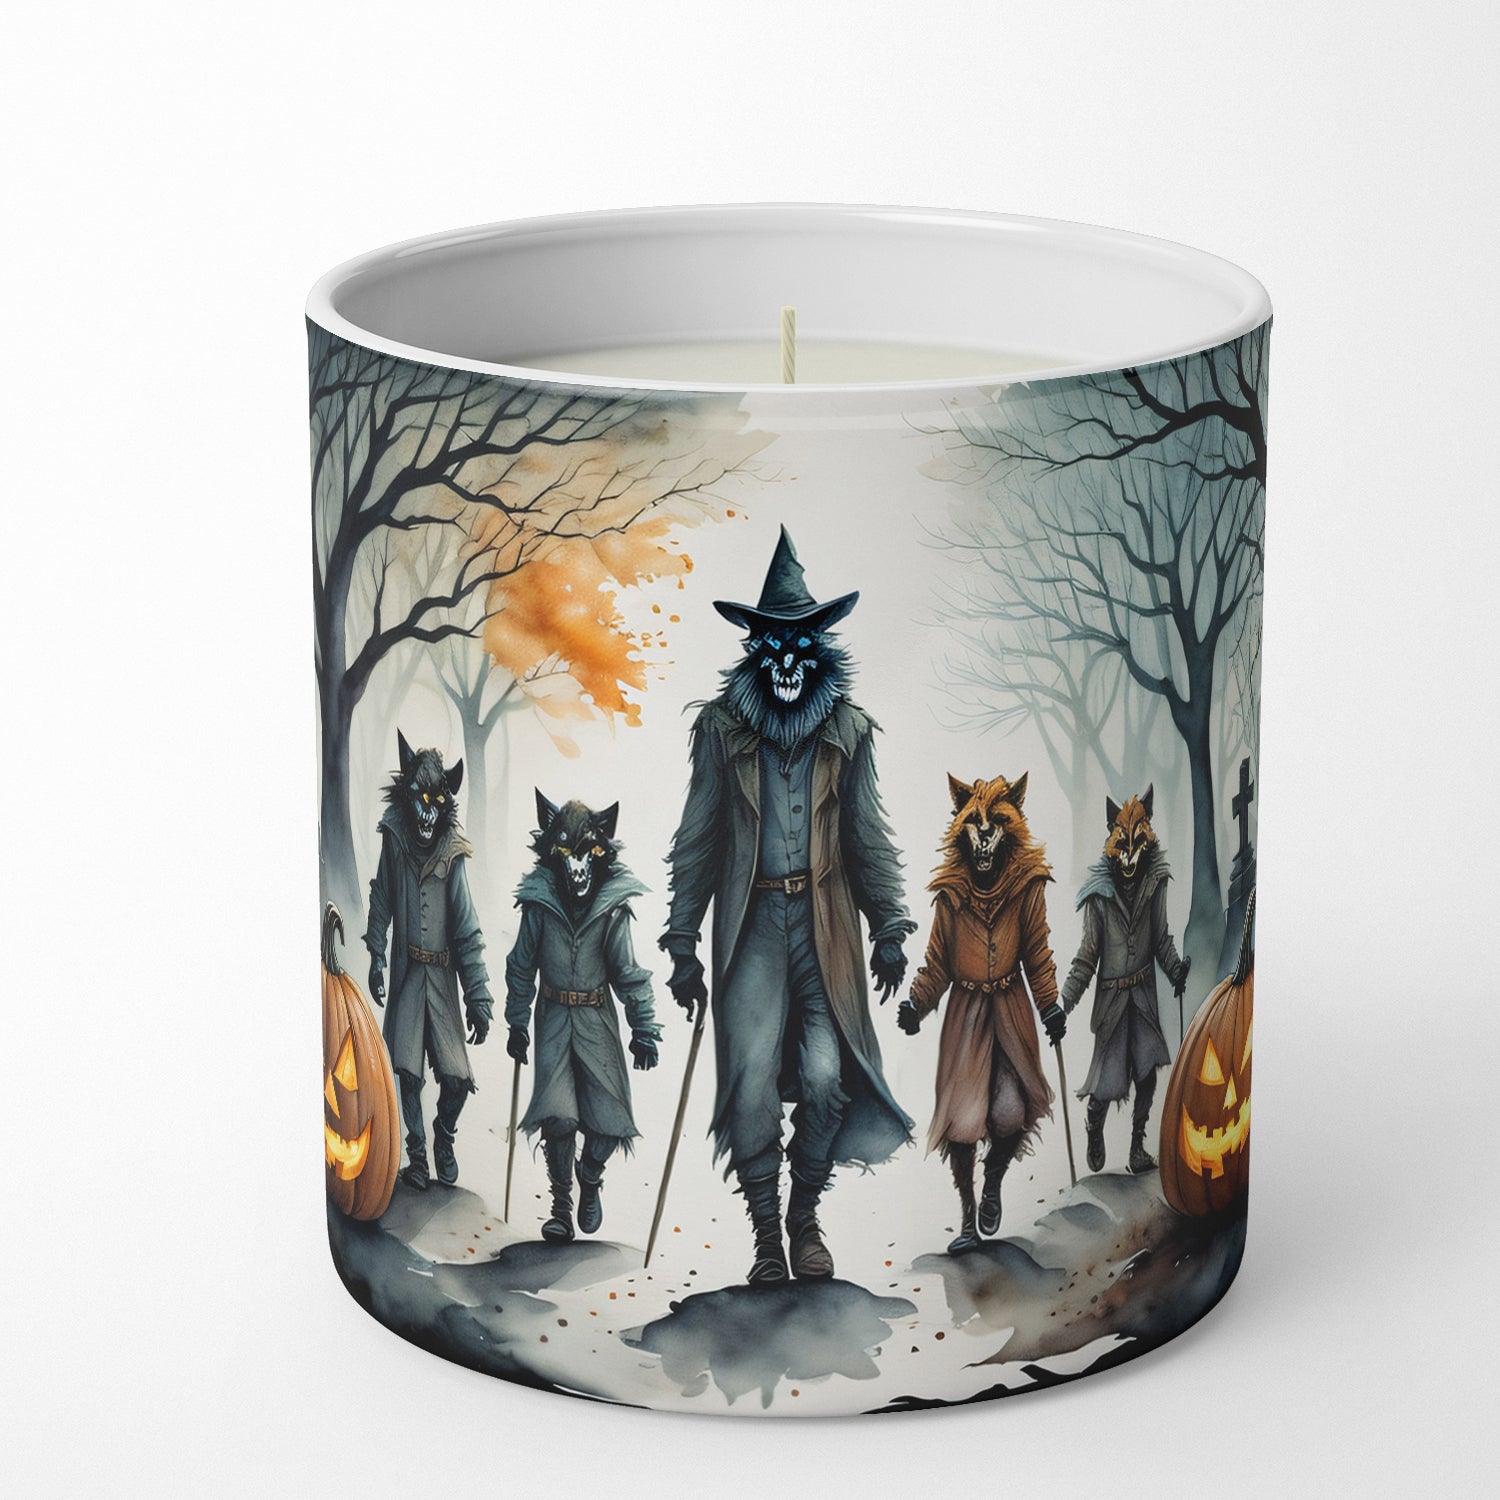 Buy this Werewolves Spooky Halloween Decorative Soy Candle